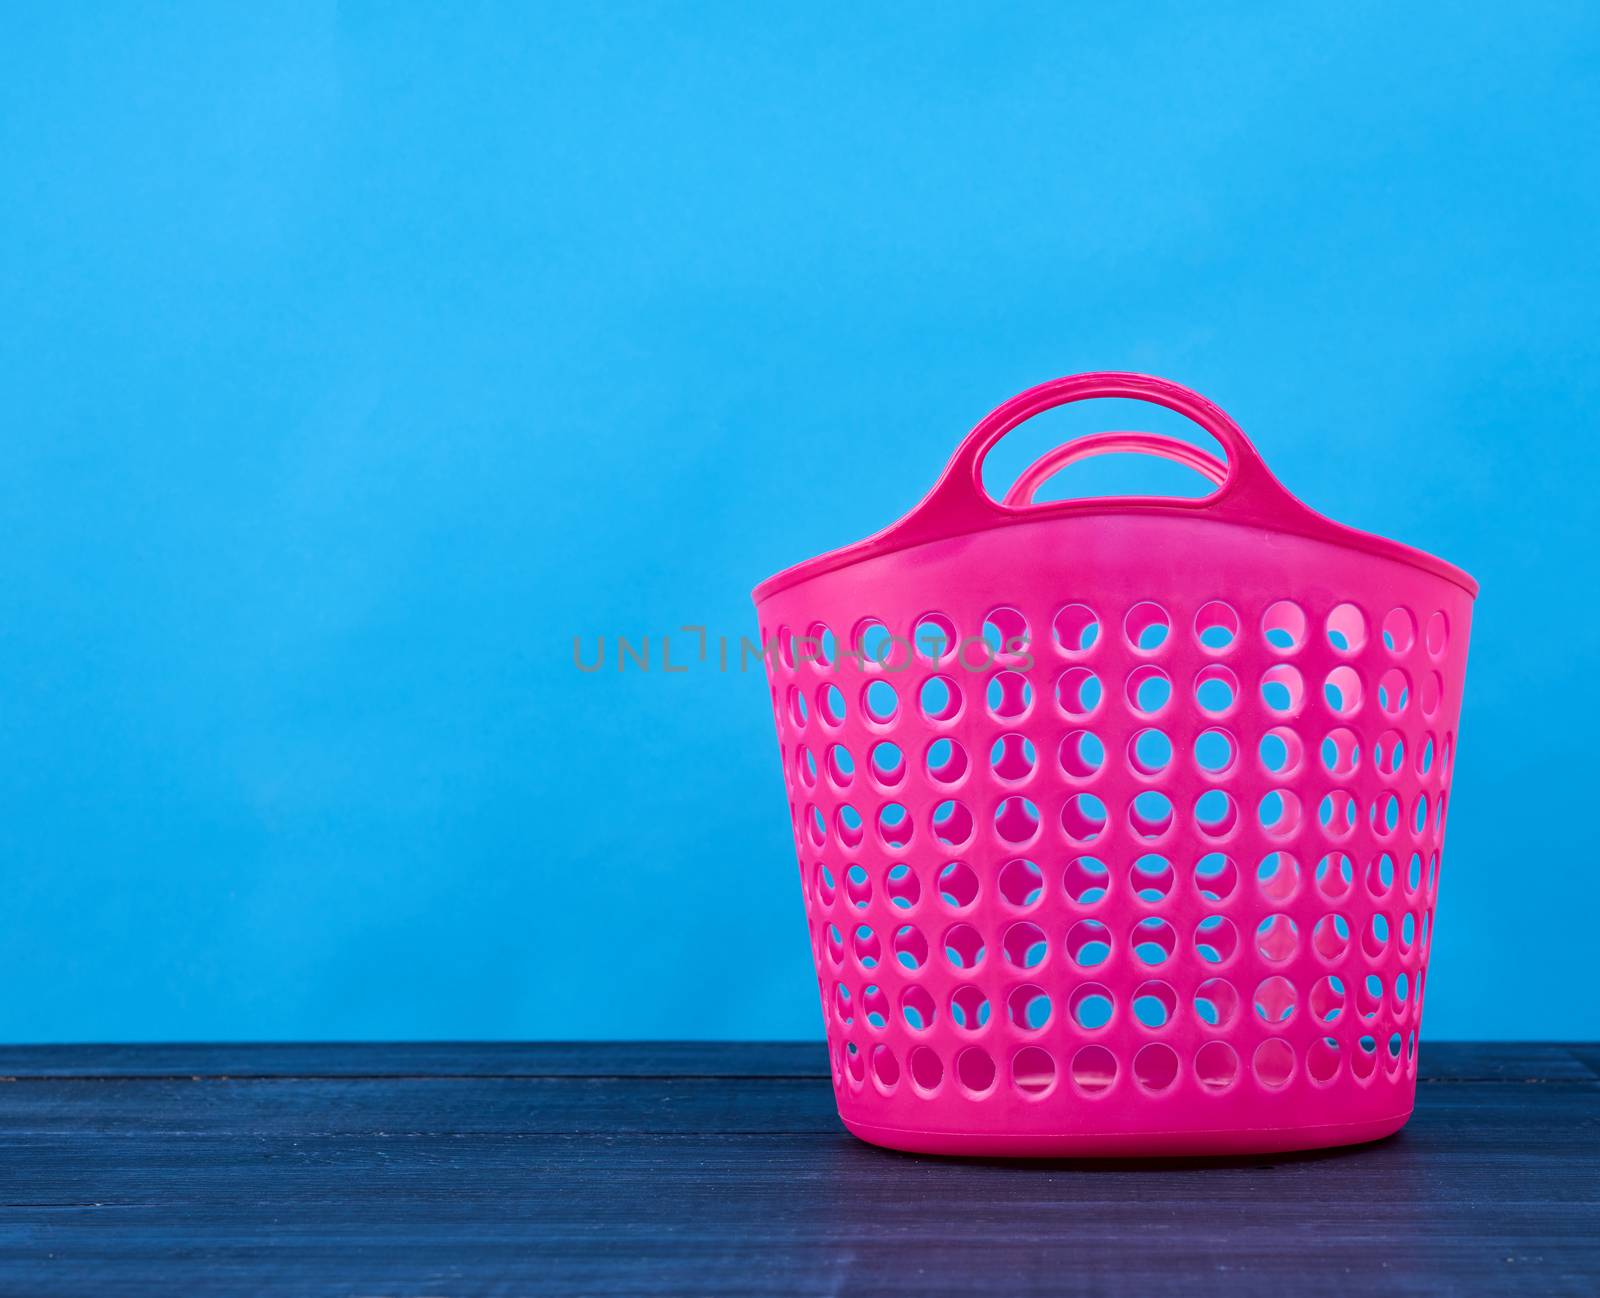 plastic pink basket in the hole for clean and dirty linen by ndanko